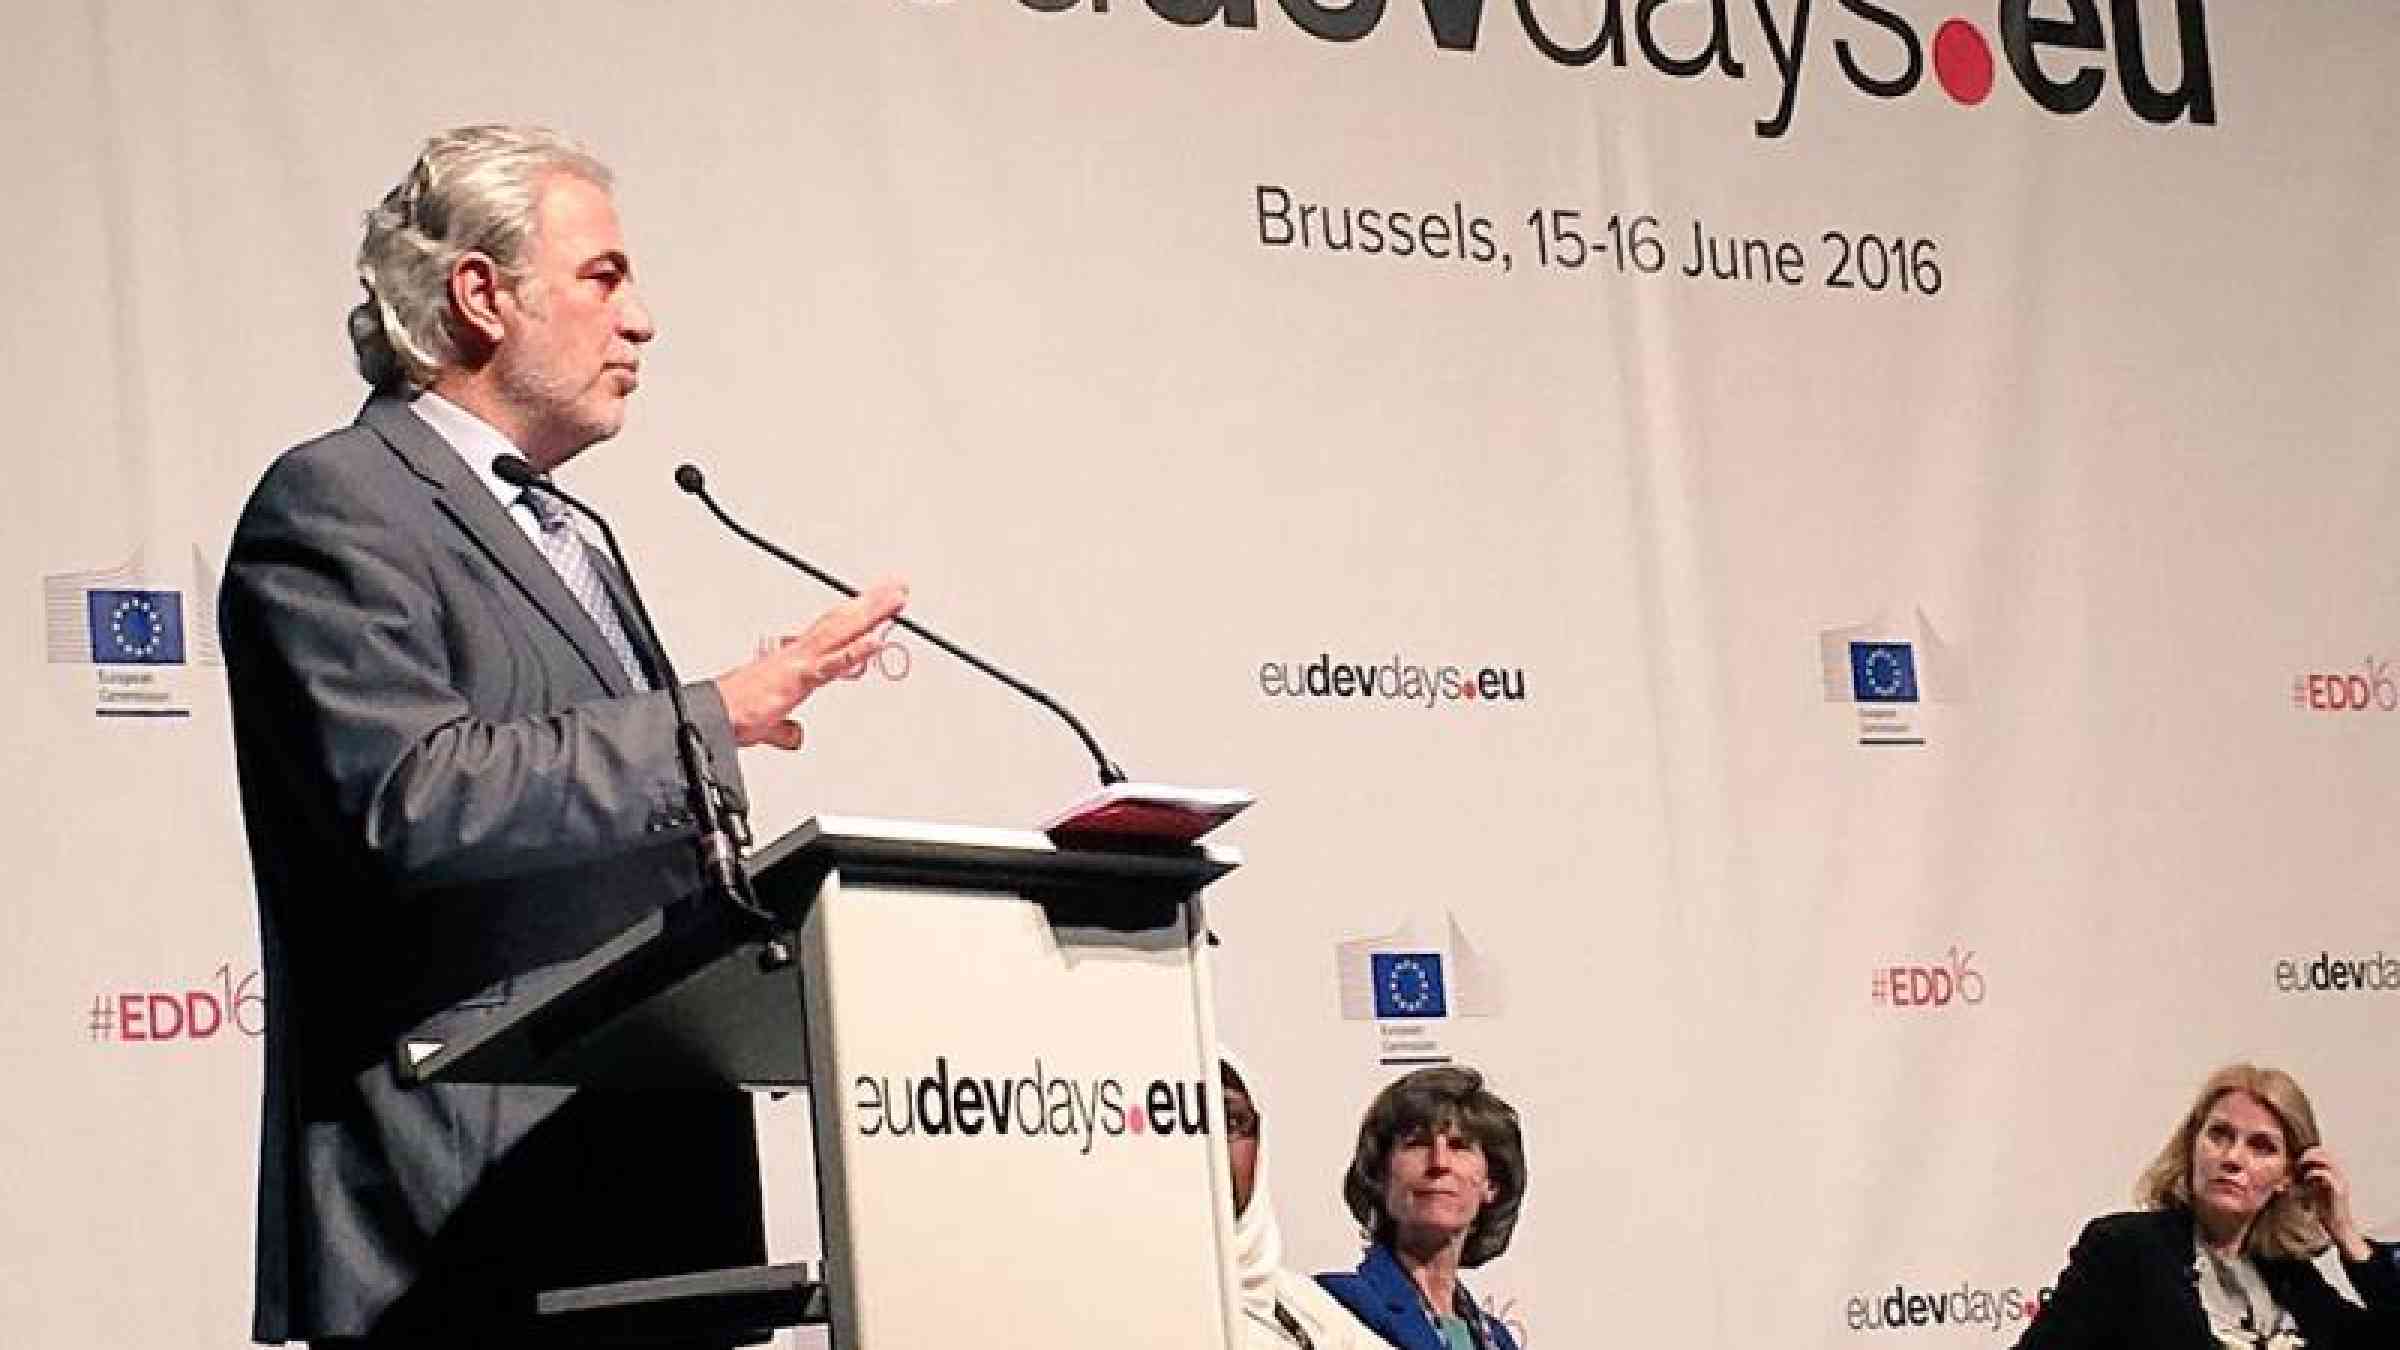 EU Commissioner for Humanitarian Aid and Crisis Management, Mr. Christos Stylianides, speaking at this week's European Development Days event